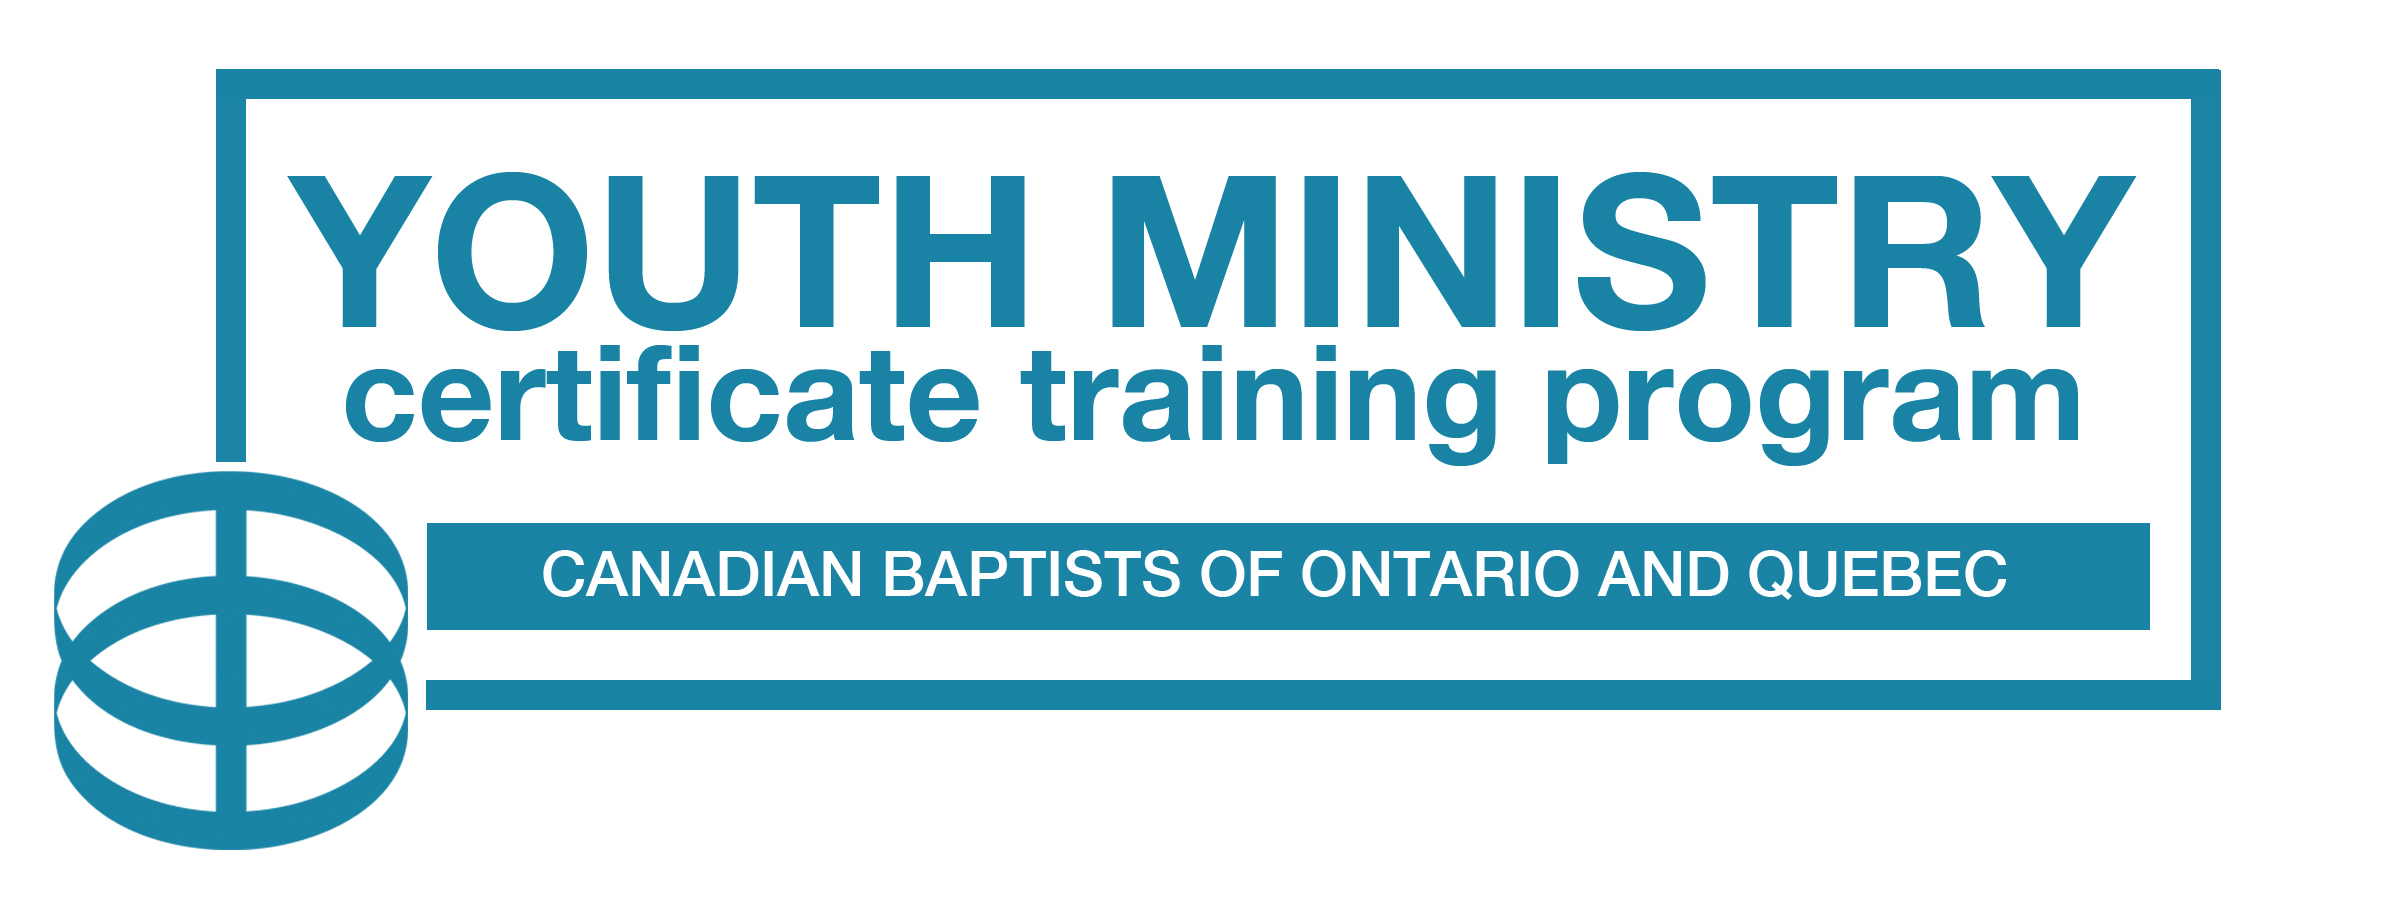 Youth Ministry Certificate Program